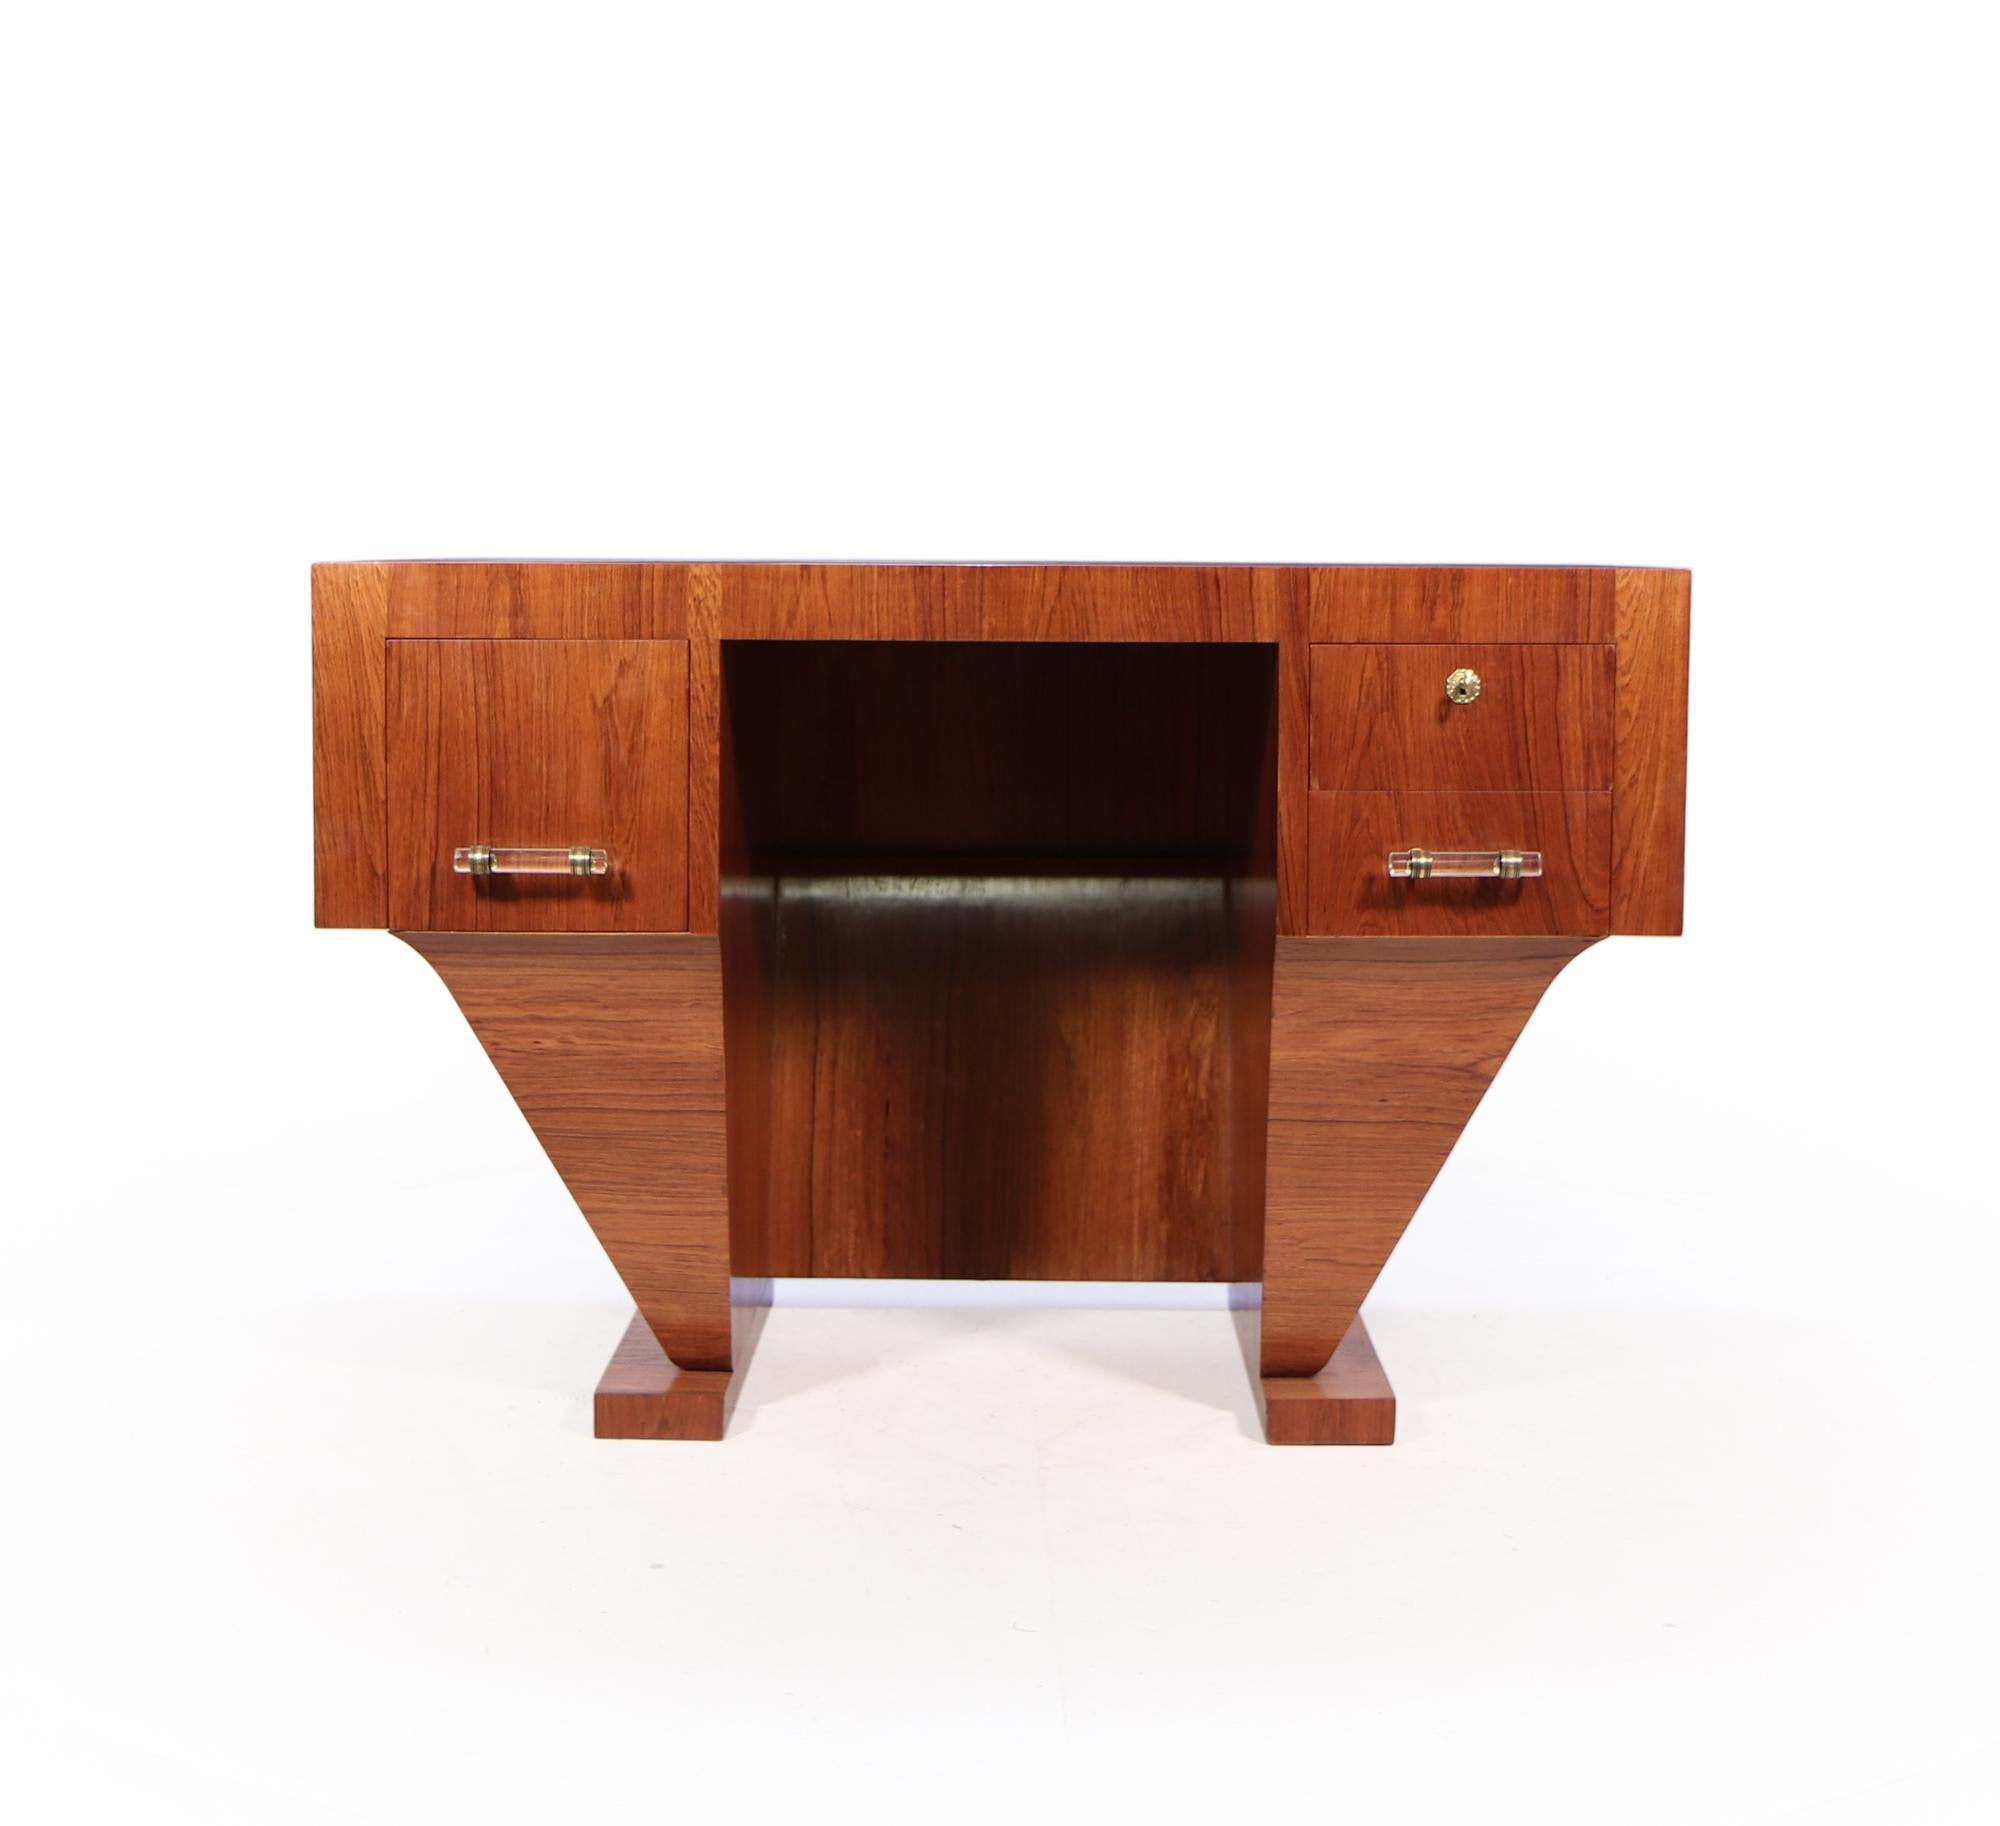 A very unusual desk of excellent quality produced in France in the 1920’s with an upside down pyramid shaped base and two drawers two the right top one is lockable and a single deep drawer to the left, this desk has been restored where necessary and